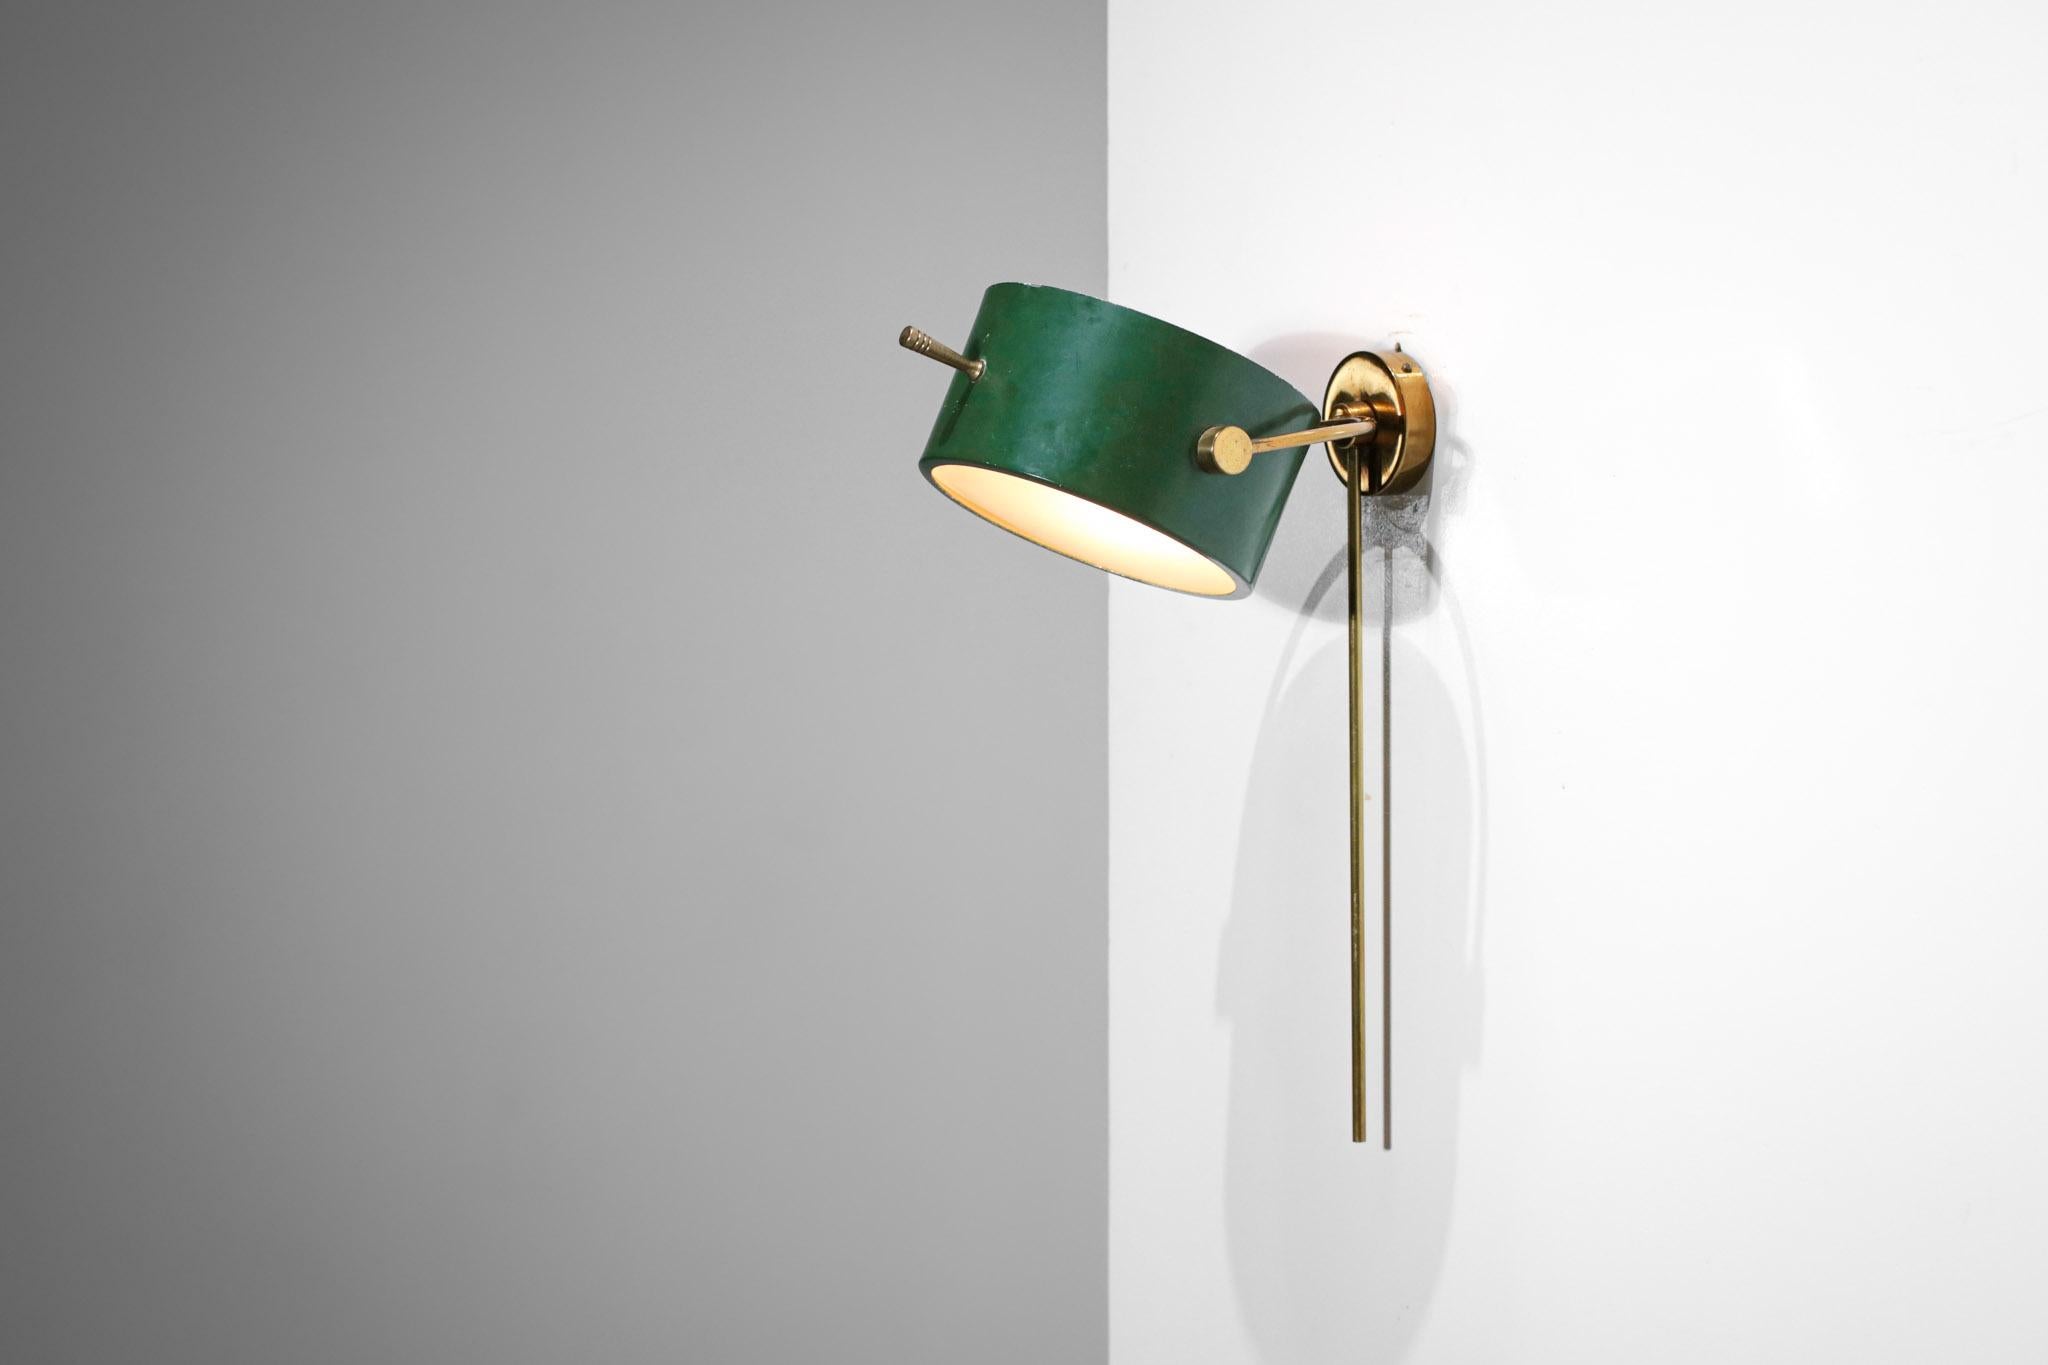 Frosted Rare 50's French Wall Lamp by Lunel Dark Green in Style of Mathieu Mategot, F420